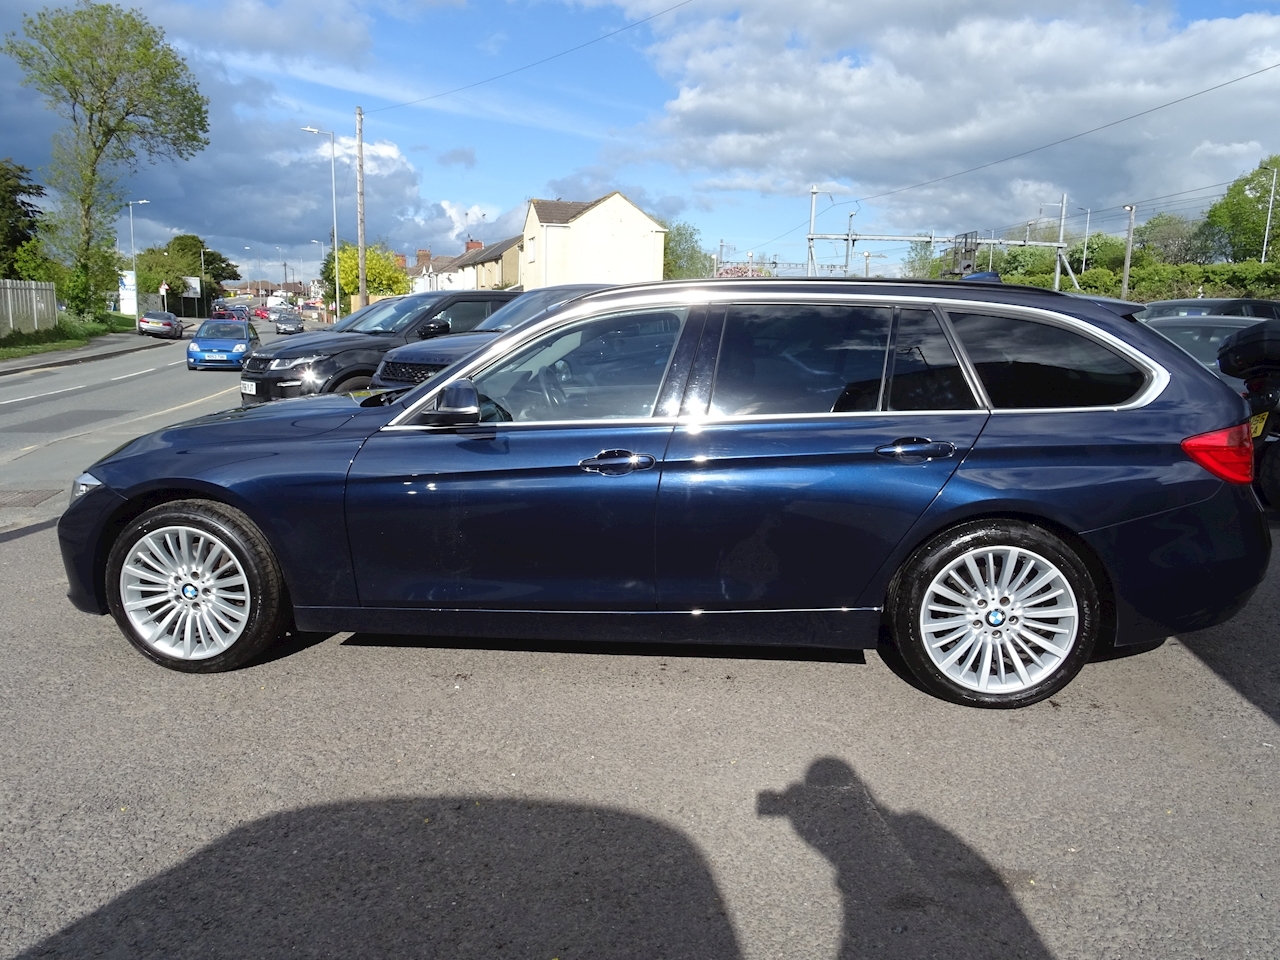 2.0 320d Luxury Touring 5dr Diesel Automatic xDrive (s/s) (133 g/km, 184 bhp)